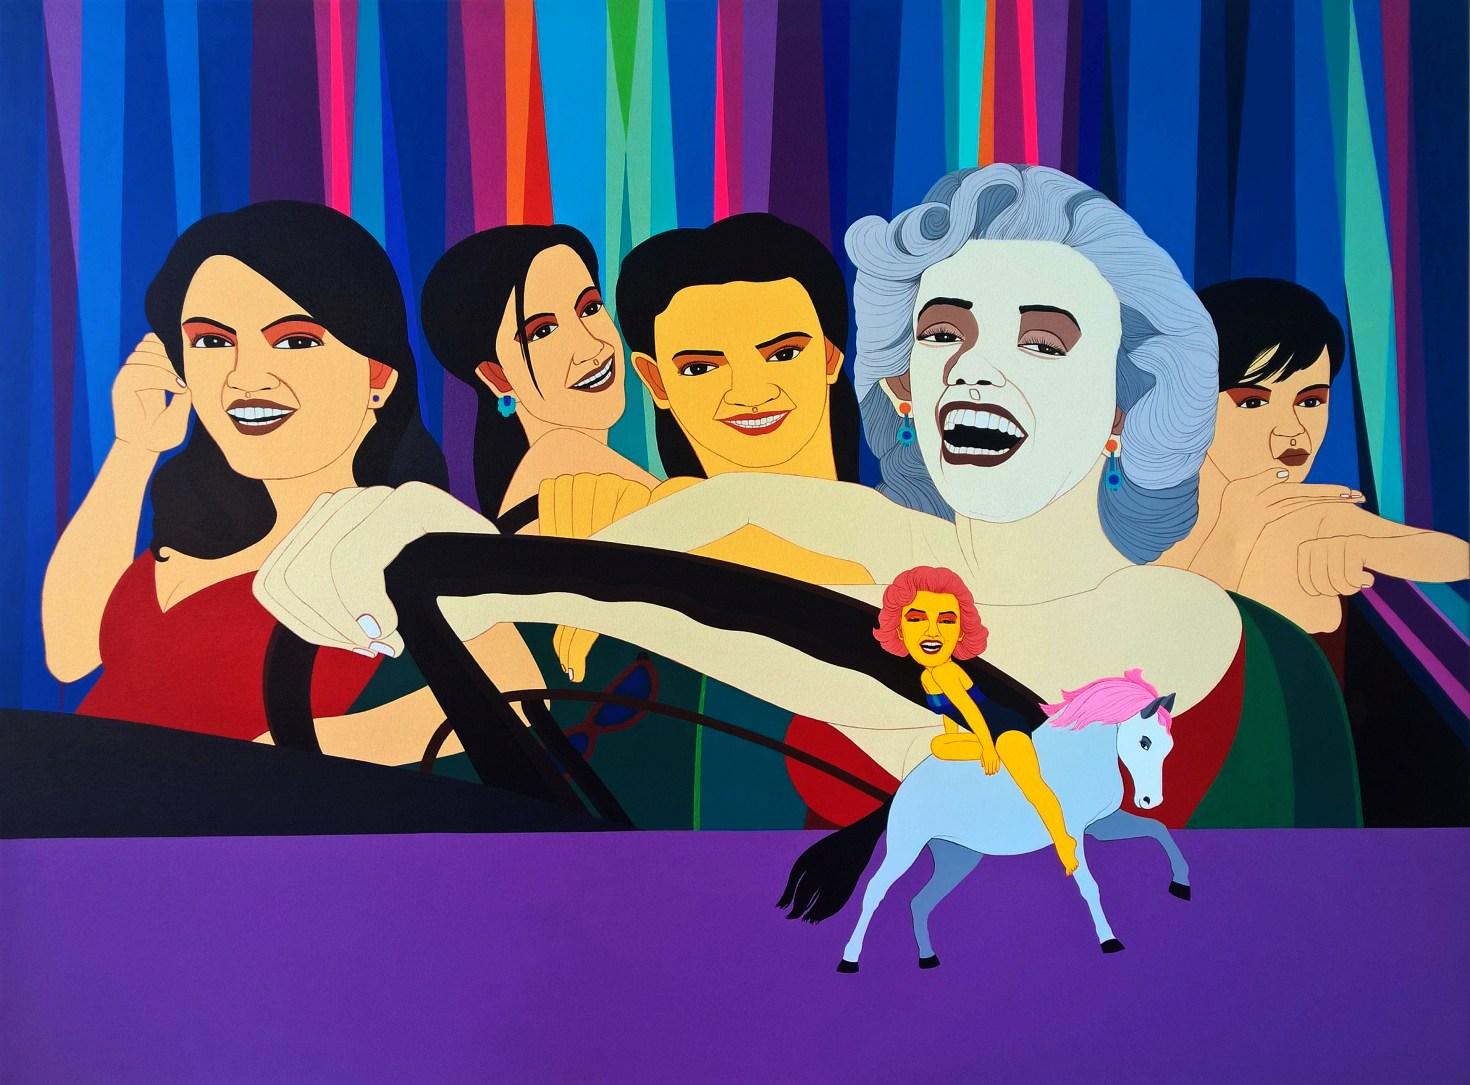 Farhad Hussain Figurative Painting - Marilyn Monroe with Friends, Acrylic on Canvas by Indian Artist "In Stock"